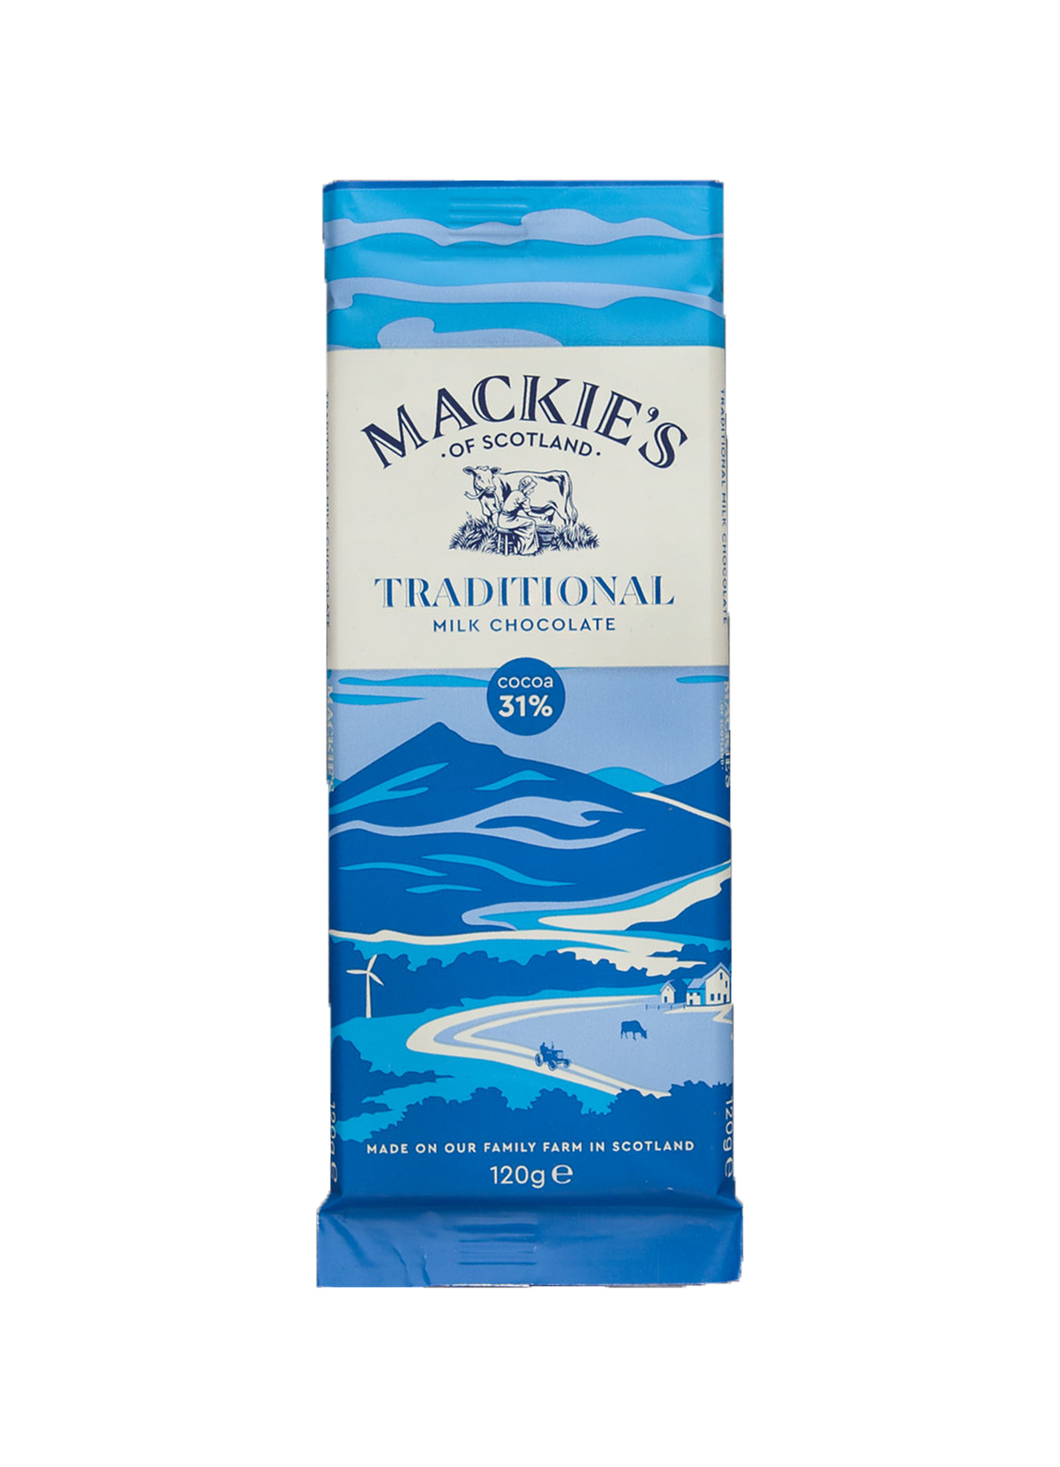 Mackie's Traditional Milk Chocolate Cocoa 31% 120g